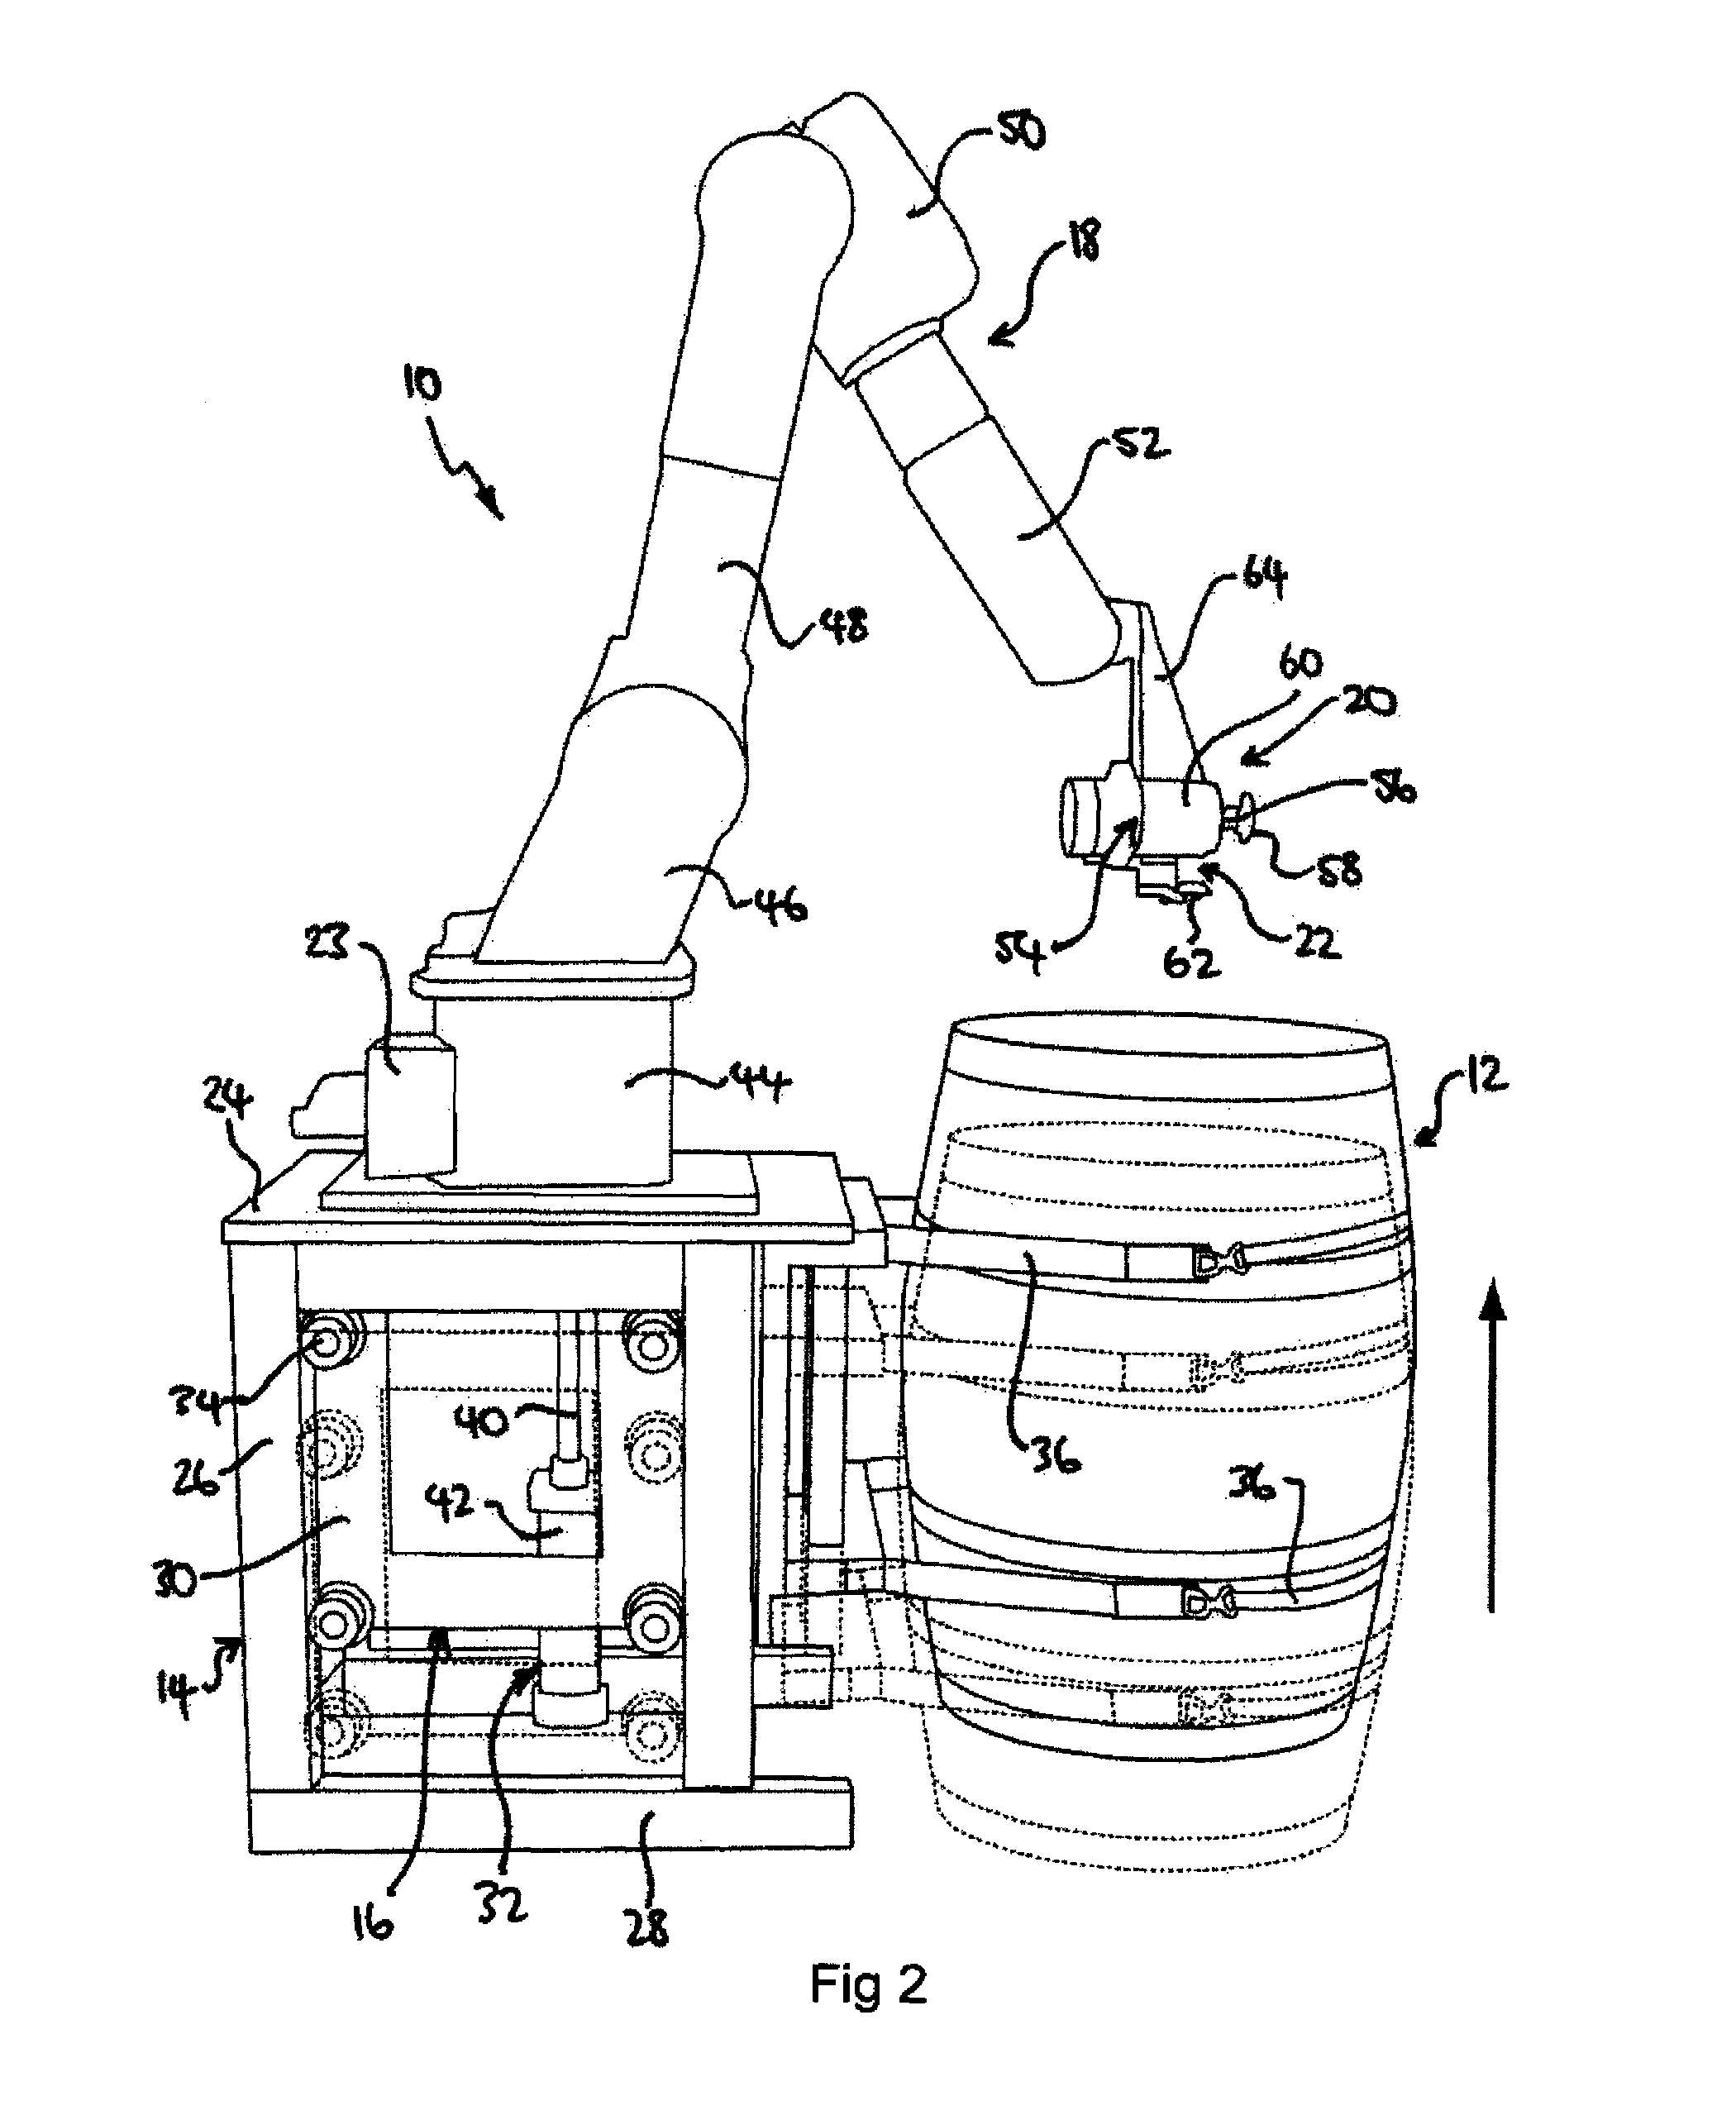 Apparatus and method for shaving the inside of barrels